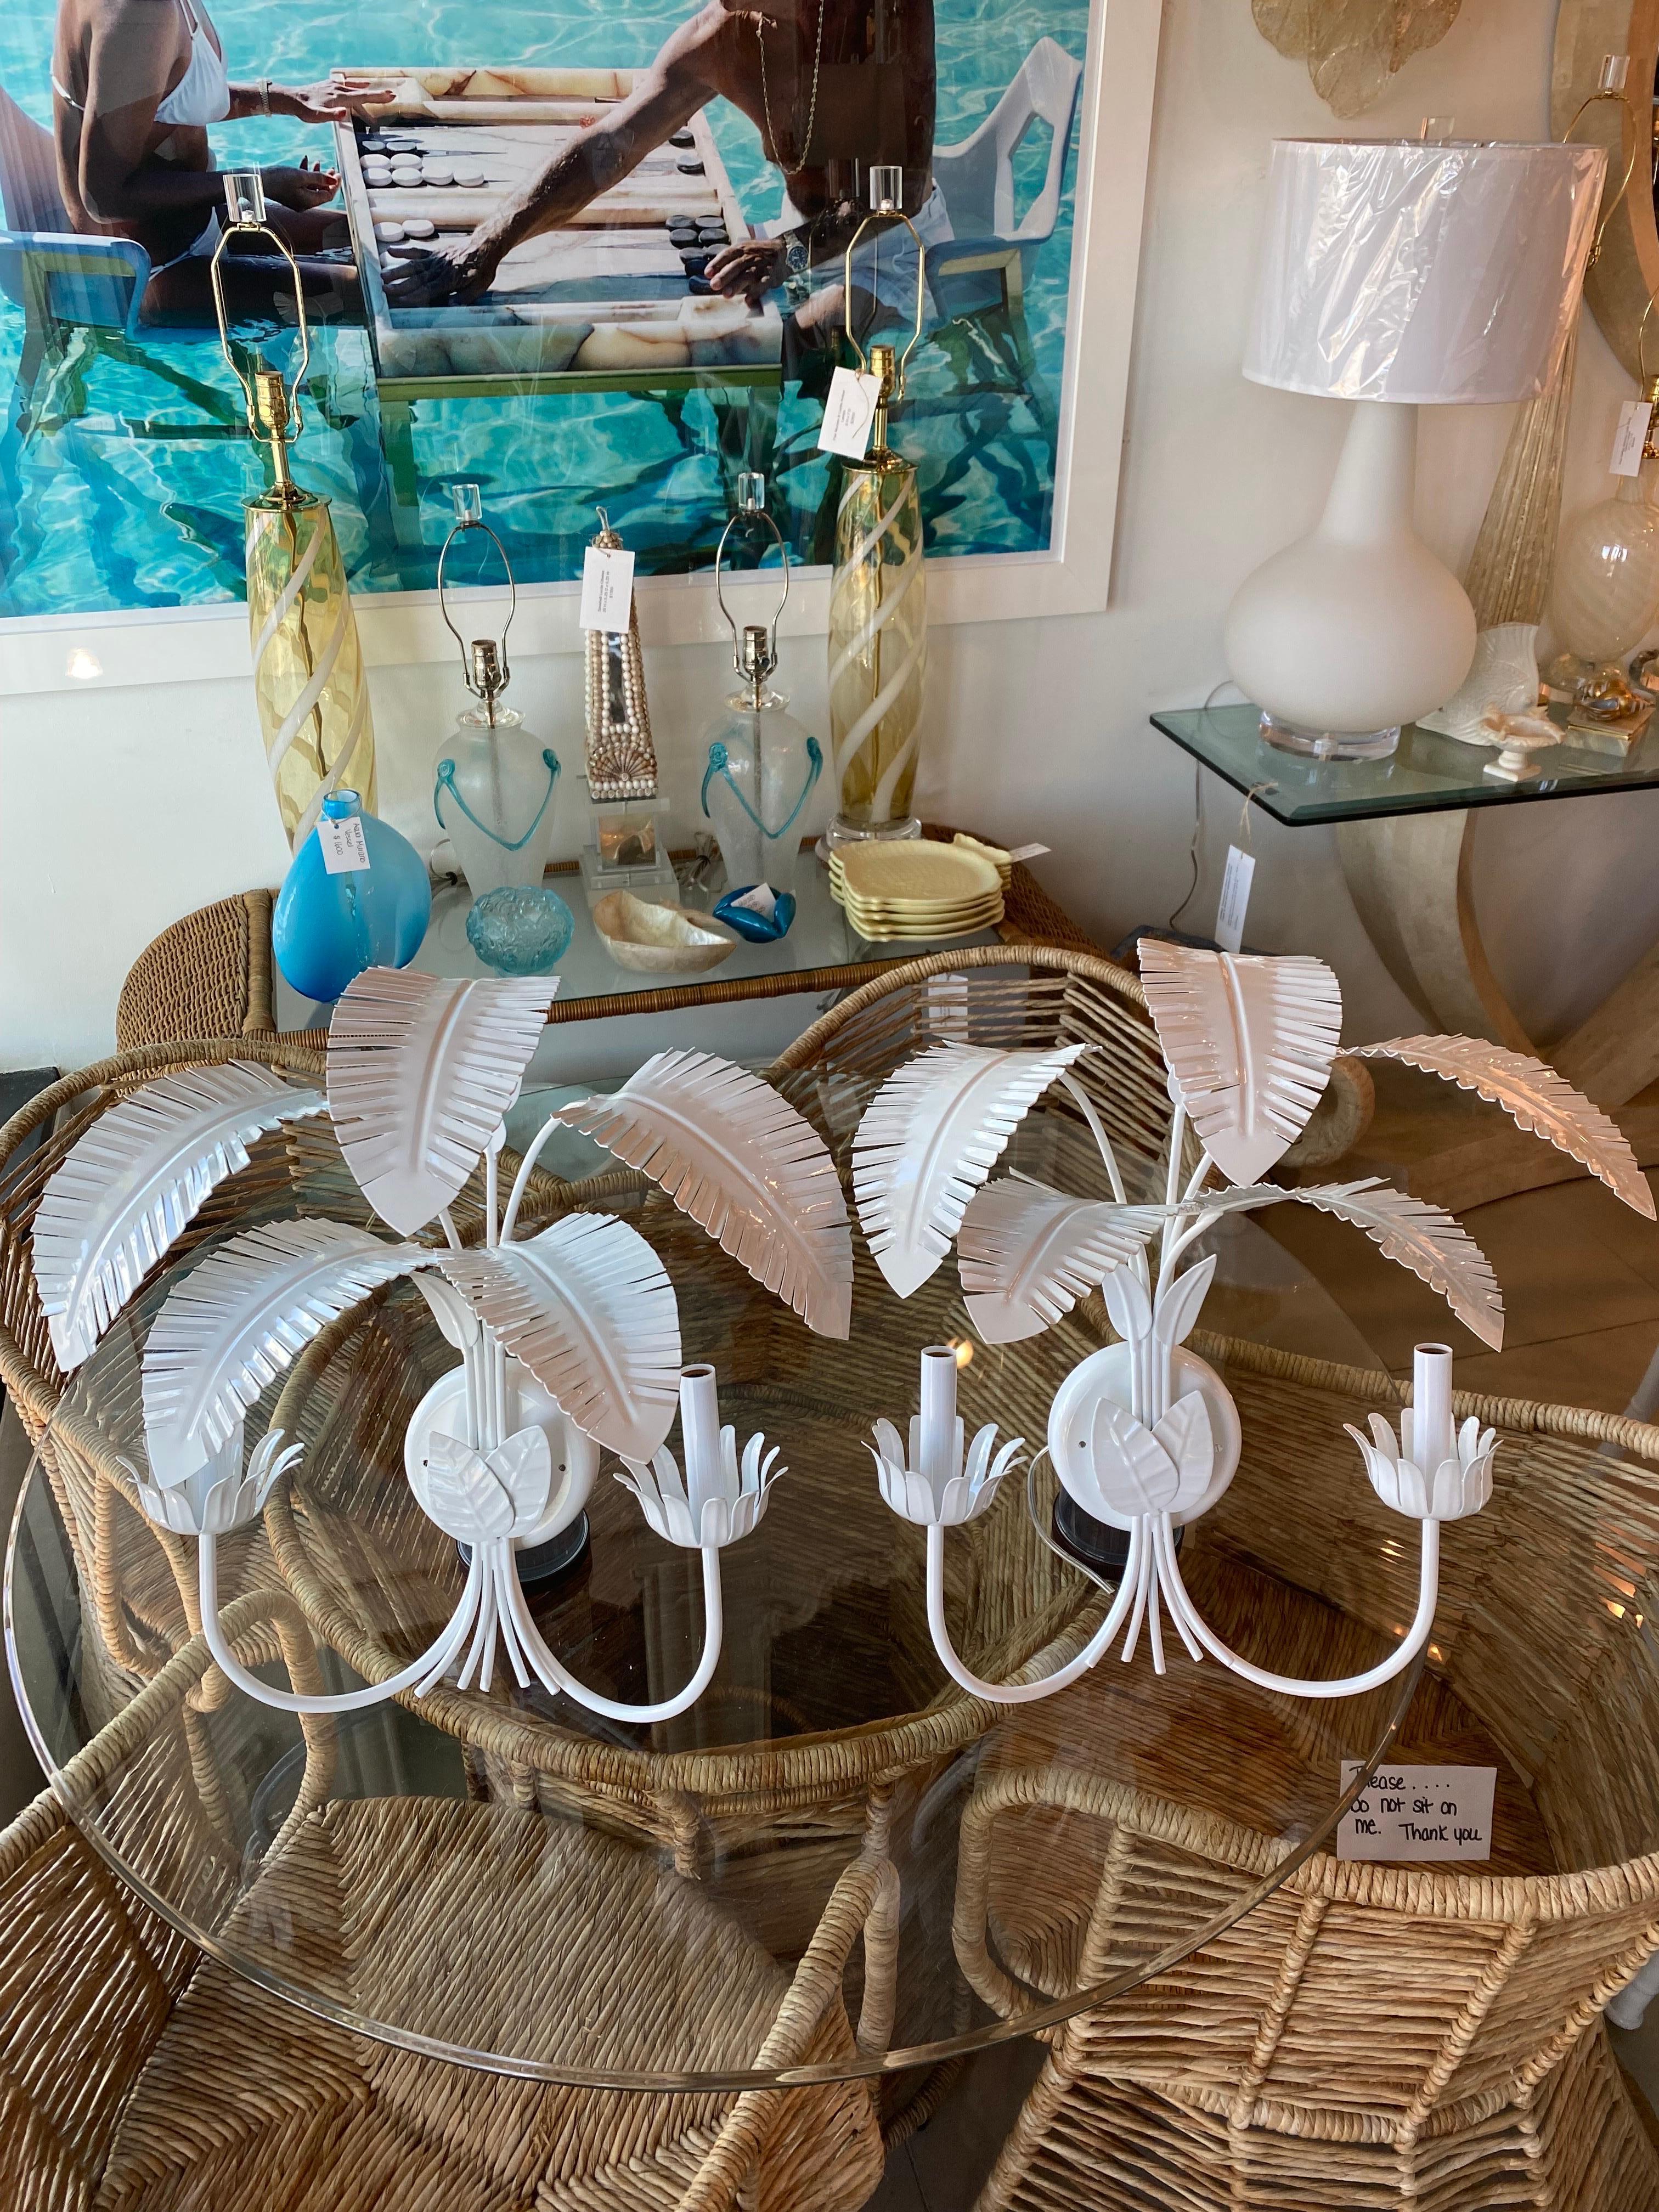 Amazing pair of vintage metal palm tree leaf wall light sconces. These have been newly wired, new light sockets and Powder-coated a fresh white. Dimensions: 19 H x 19 W x 11 D.